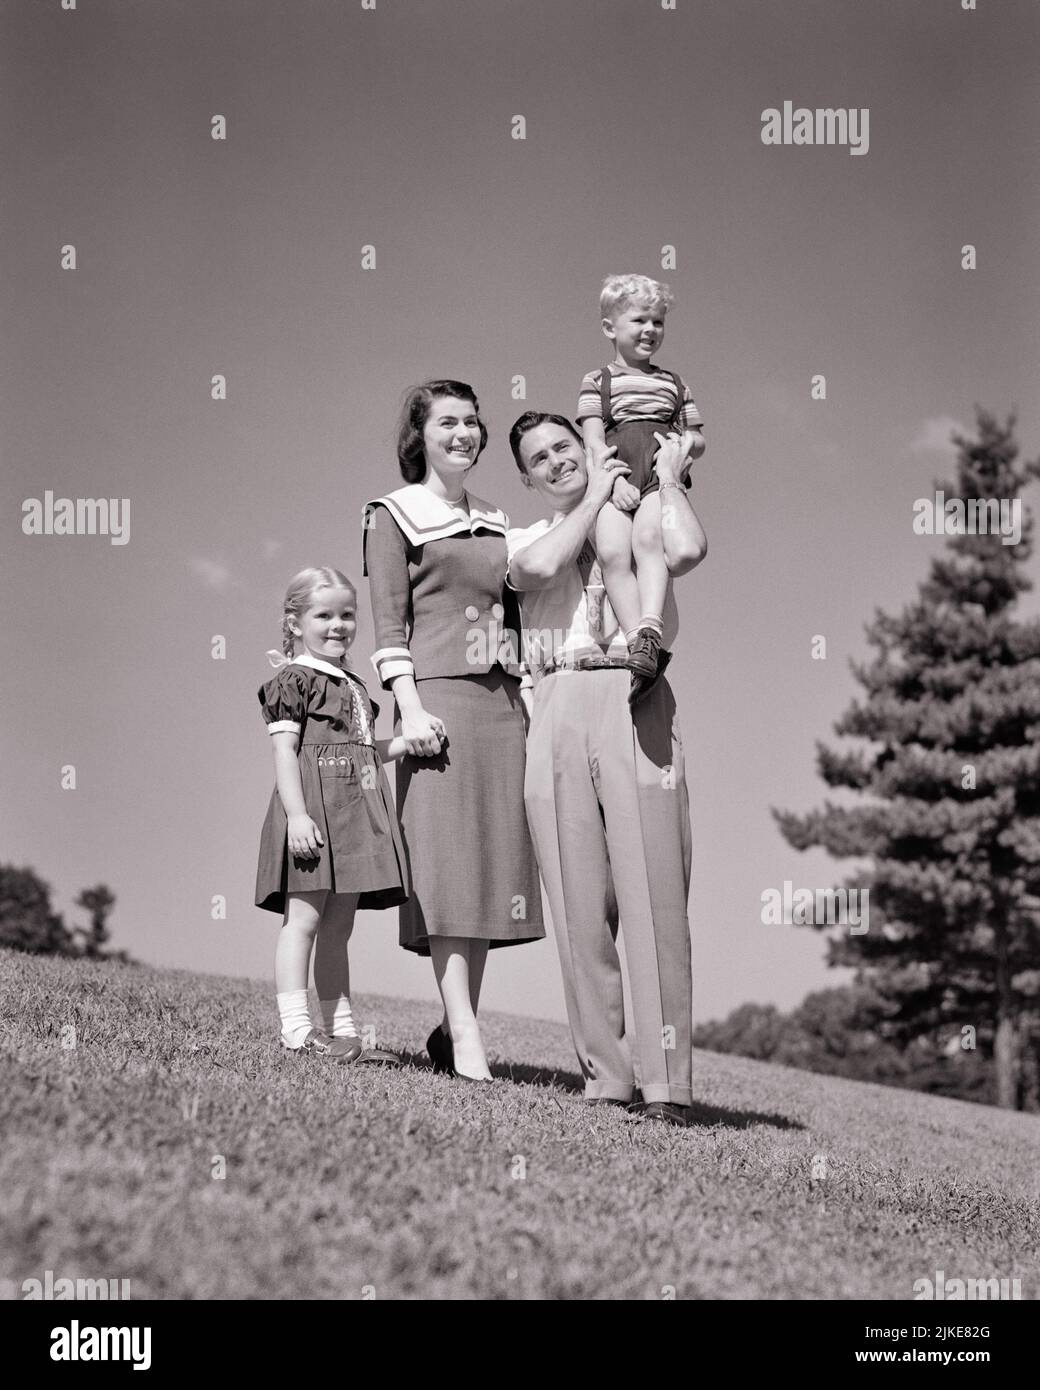 1950s FAMILY ON GRASSY HILLSIDE MOTHER FATHER AND 2 KIDS BOY ON DAD’S SHOULDER GIRL HOLDING HANDS WITH MOM LOOKING OUT AT VIEW - j4275 HAR001 HARS SHOULDER MOM CLOTHING NOSTALGIC PAIR 4 SUBURBAN MOTHERS OLD TIME NOSTALGIA BROTHER OLD FASHION SISTER JUVENILE STYLE PLEASED FAMILIES JOY LIFESTYLE FEMALES MARRIED BROTHERS RURAL SPOUSE HUSBANDS HEALTHINESS HOME LIFE COPY SPACE FRIENDSHIP FULL-LENGTH LADIES PERSONS MALES SIBLINGS SISTERS FATHERS B&W PARTNER SUMMERTIME HAPPINESS CHEERFUL ADVENTURE LEISURE AND DADS EXCITEMENT LOW ANGLE PARKS RECREATION PRIDE SIBLING SMILES CONNECTION NUCLEAR FAMILY Stock Photo